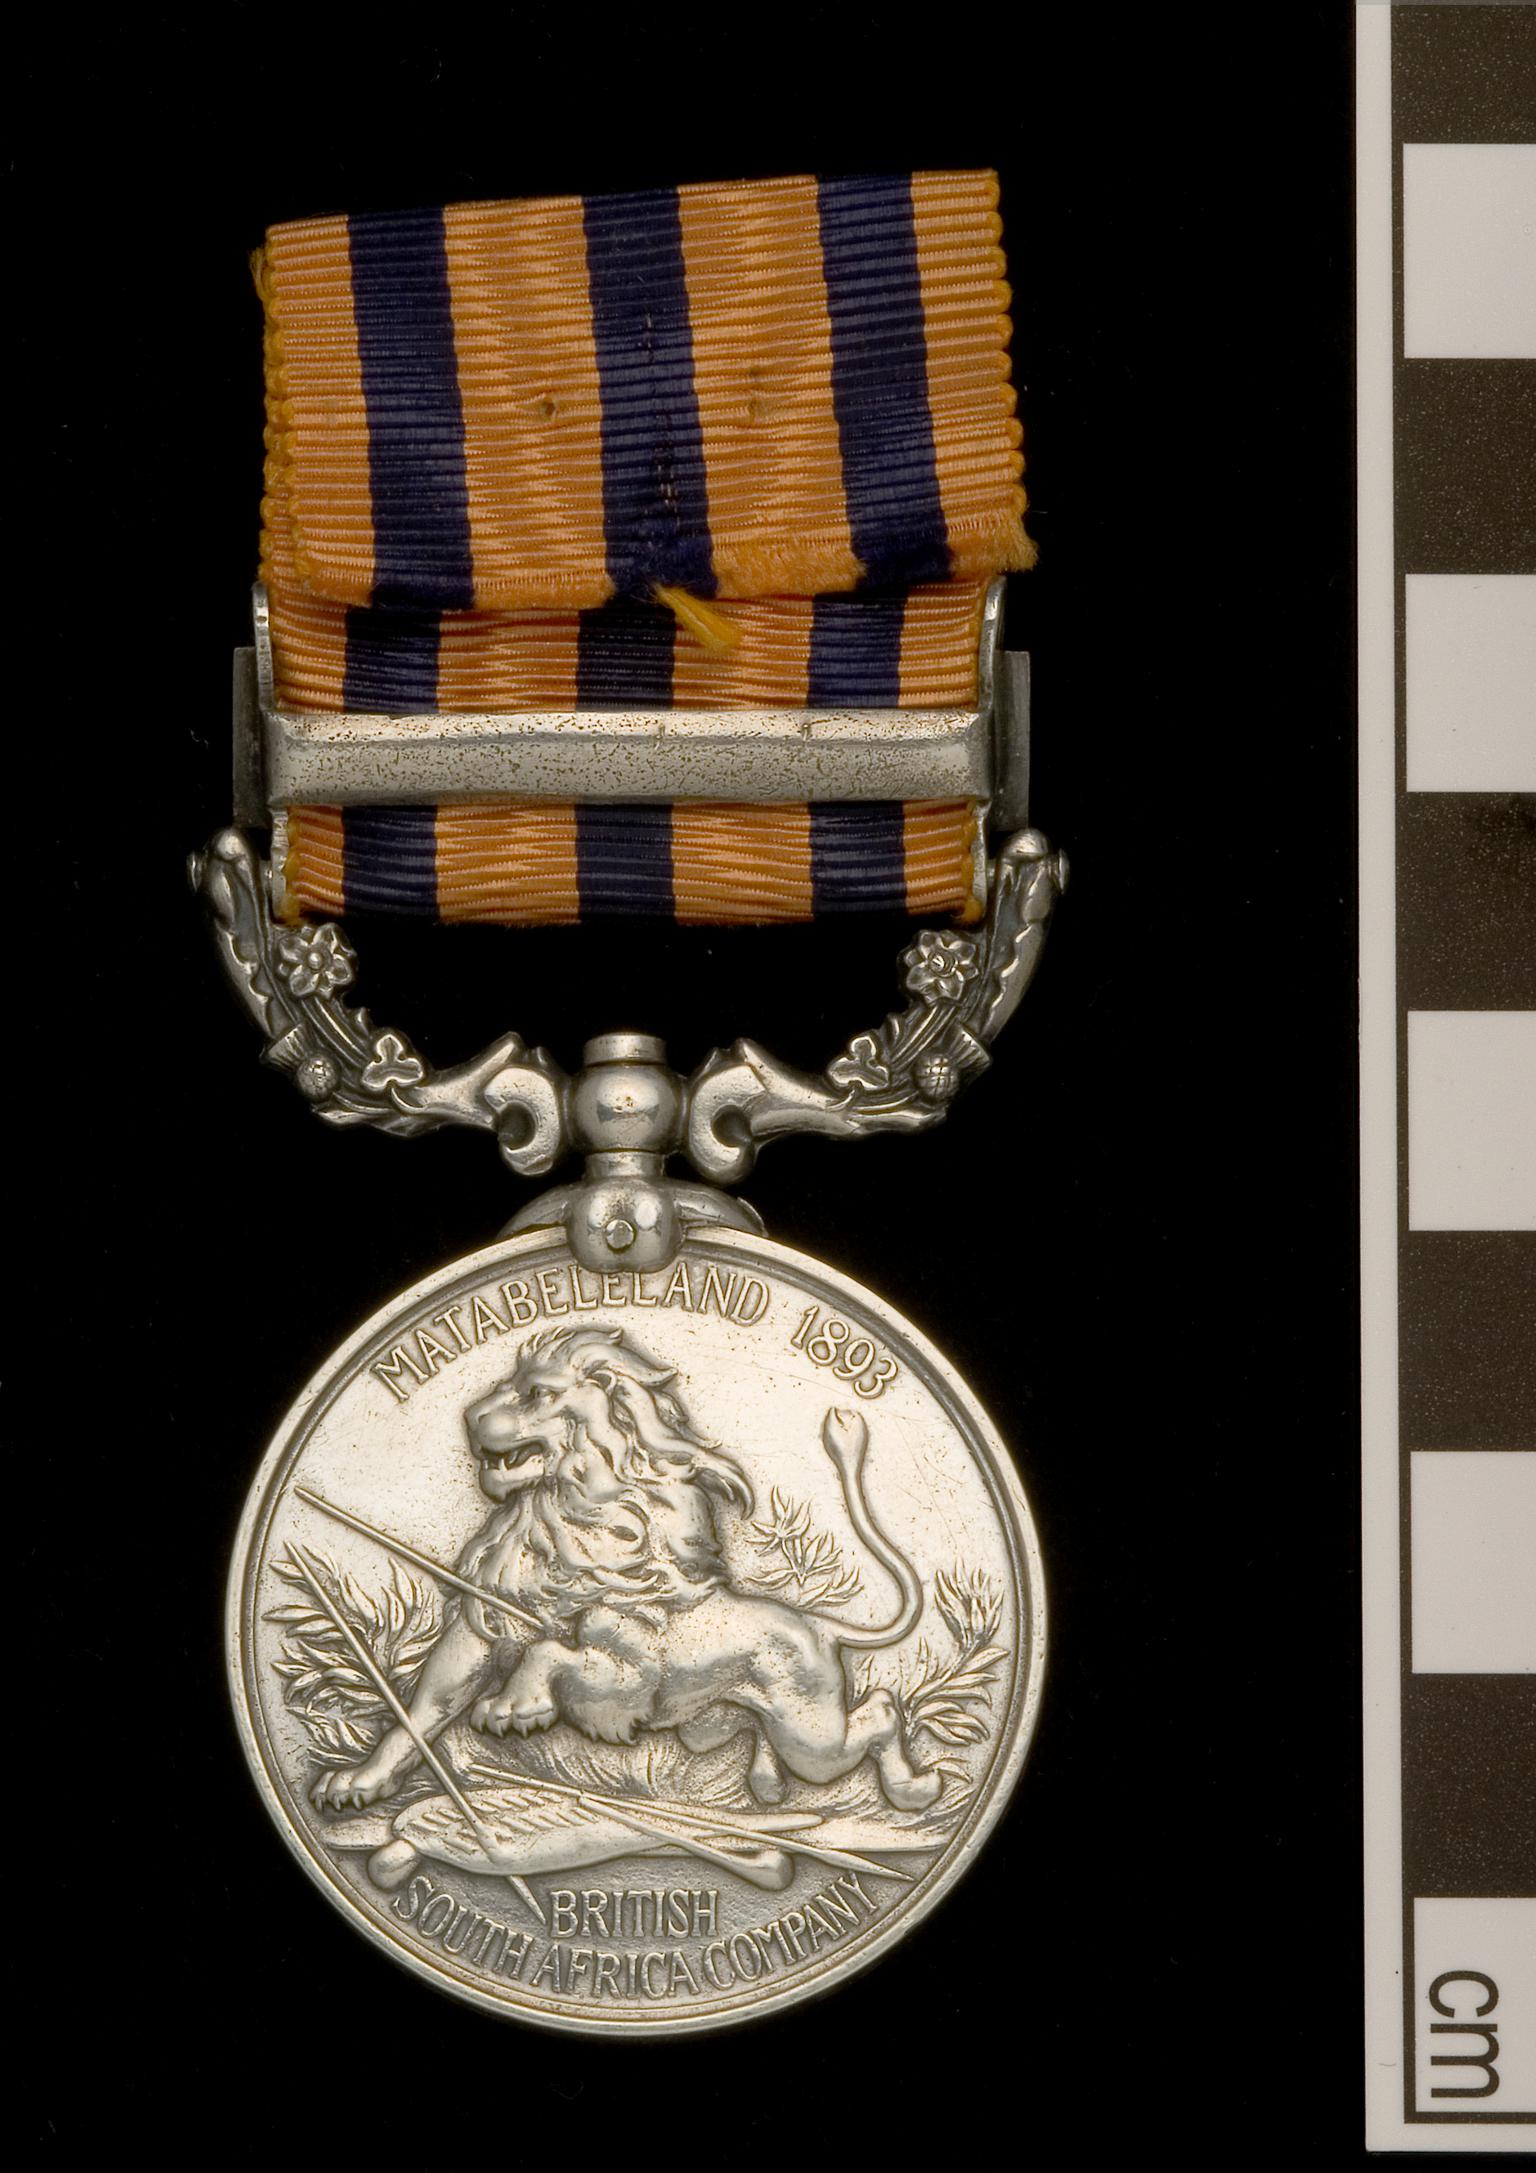 British South Africa Company's Medal